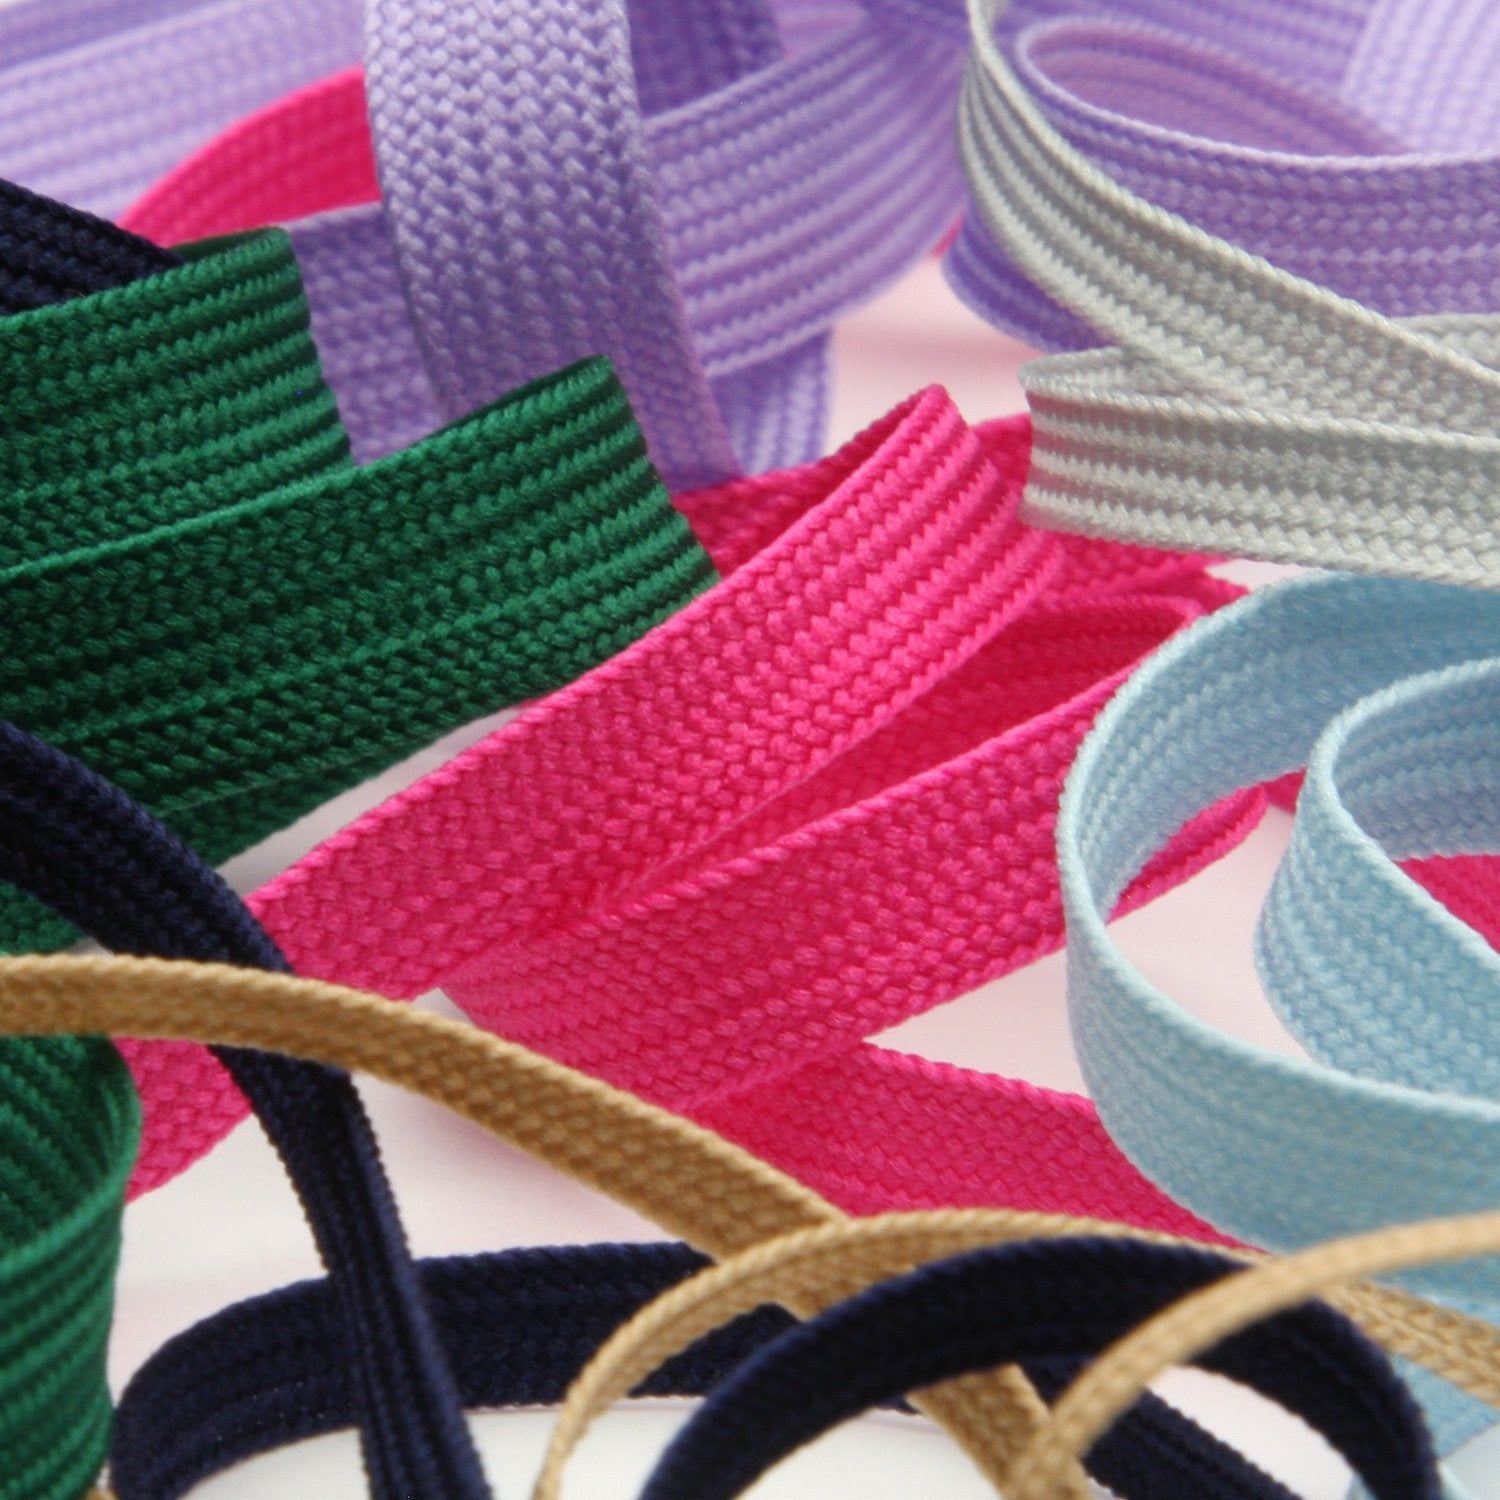 FUJIYAMA RIBBON [Wholesale] Polyester Trimming Braid approx.9mm 30 Meters Roll